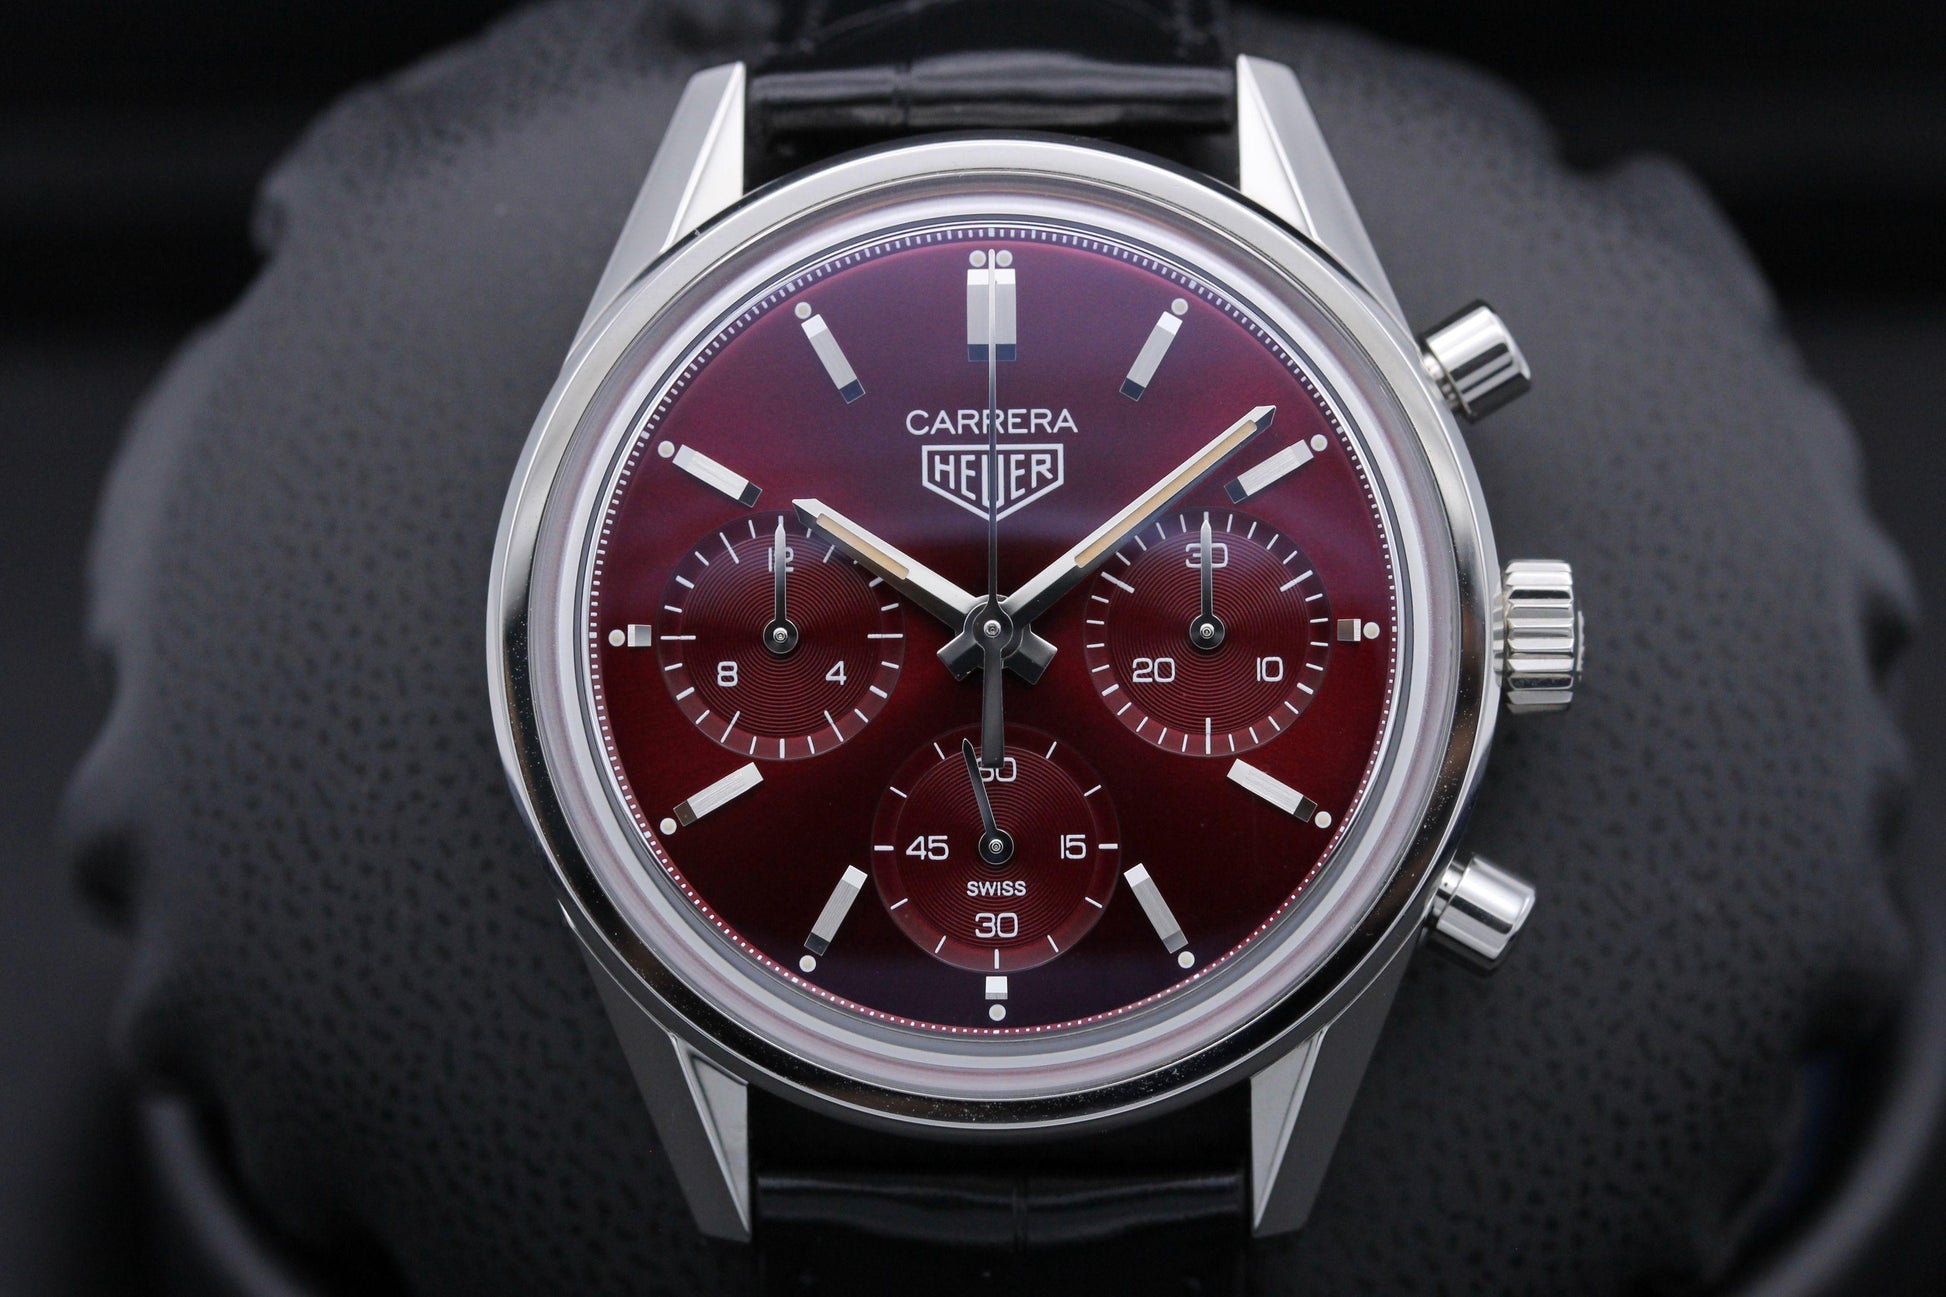 Tag Heuer Carrera Automatic Chronograph Red Dial Black Leather Strap Watch for Men - CBK221G.FC6479